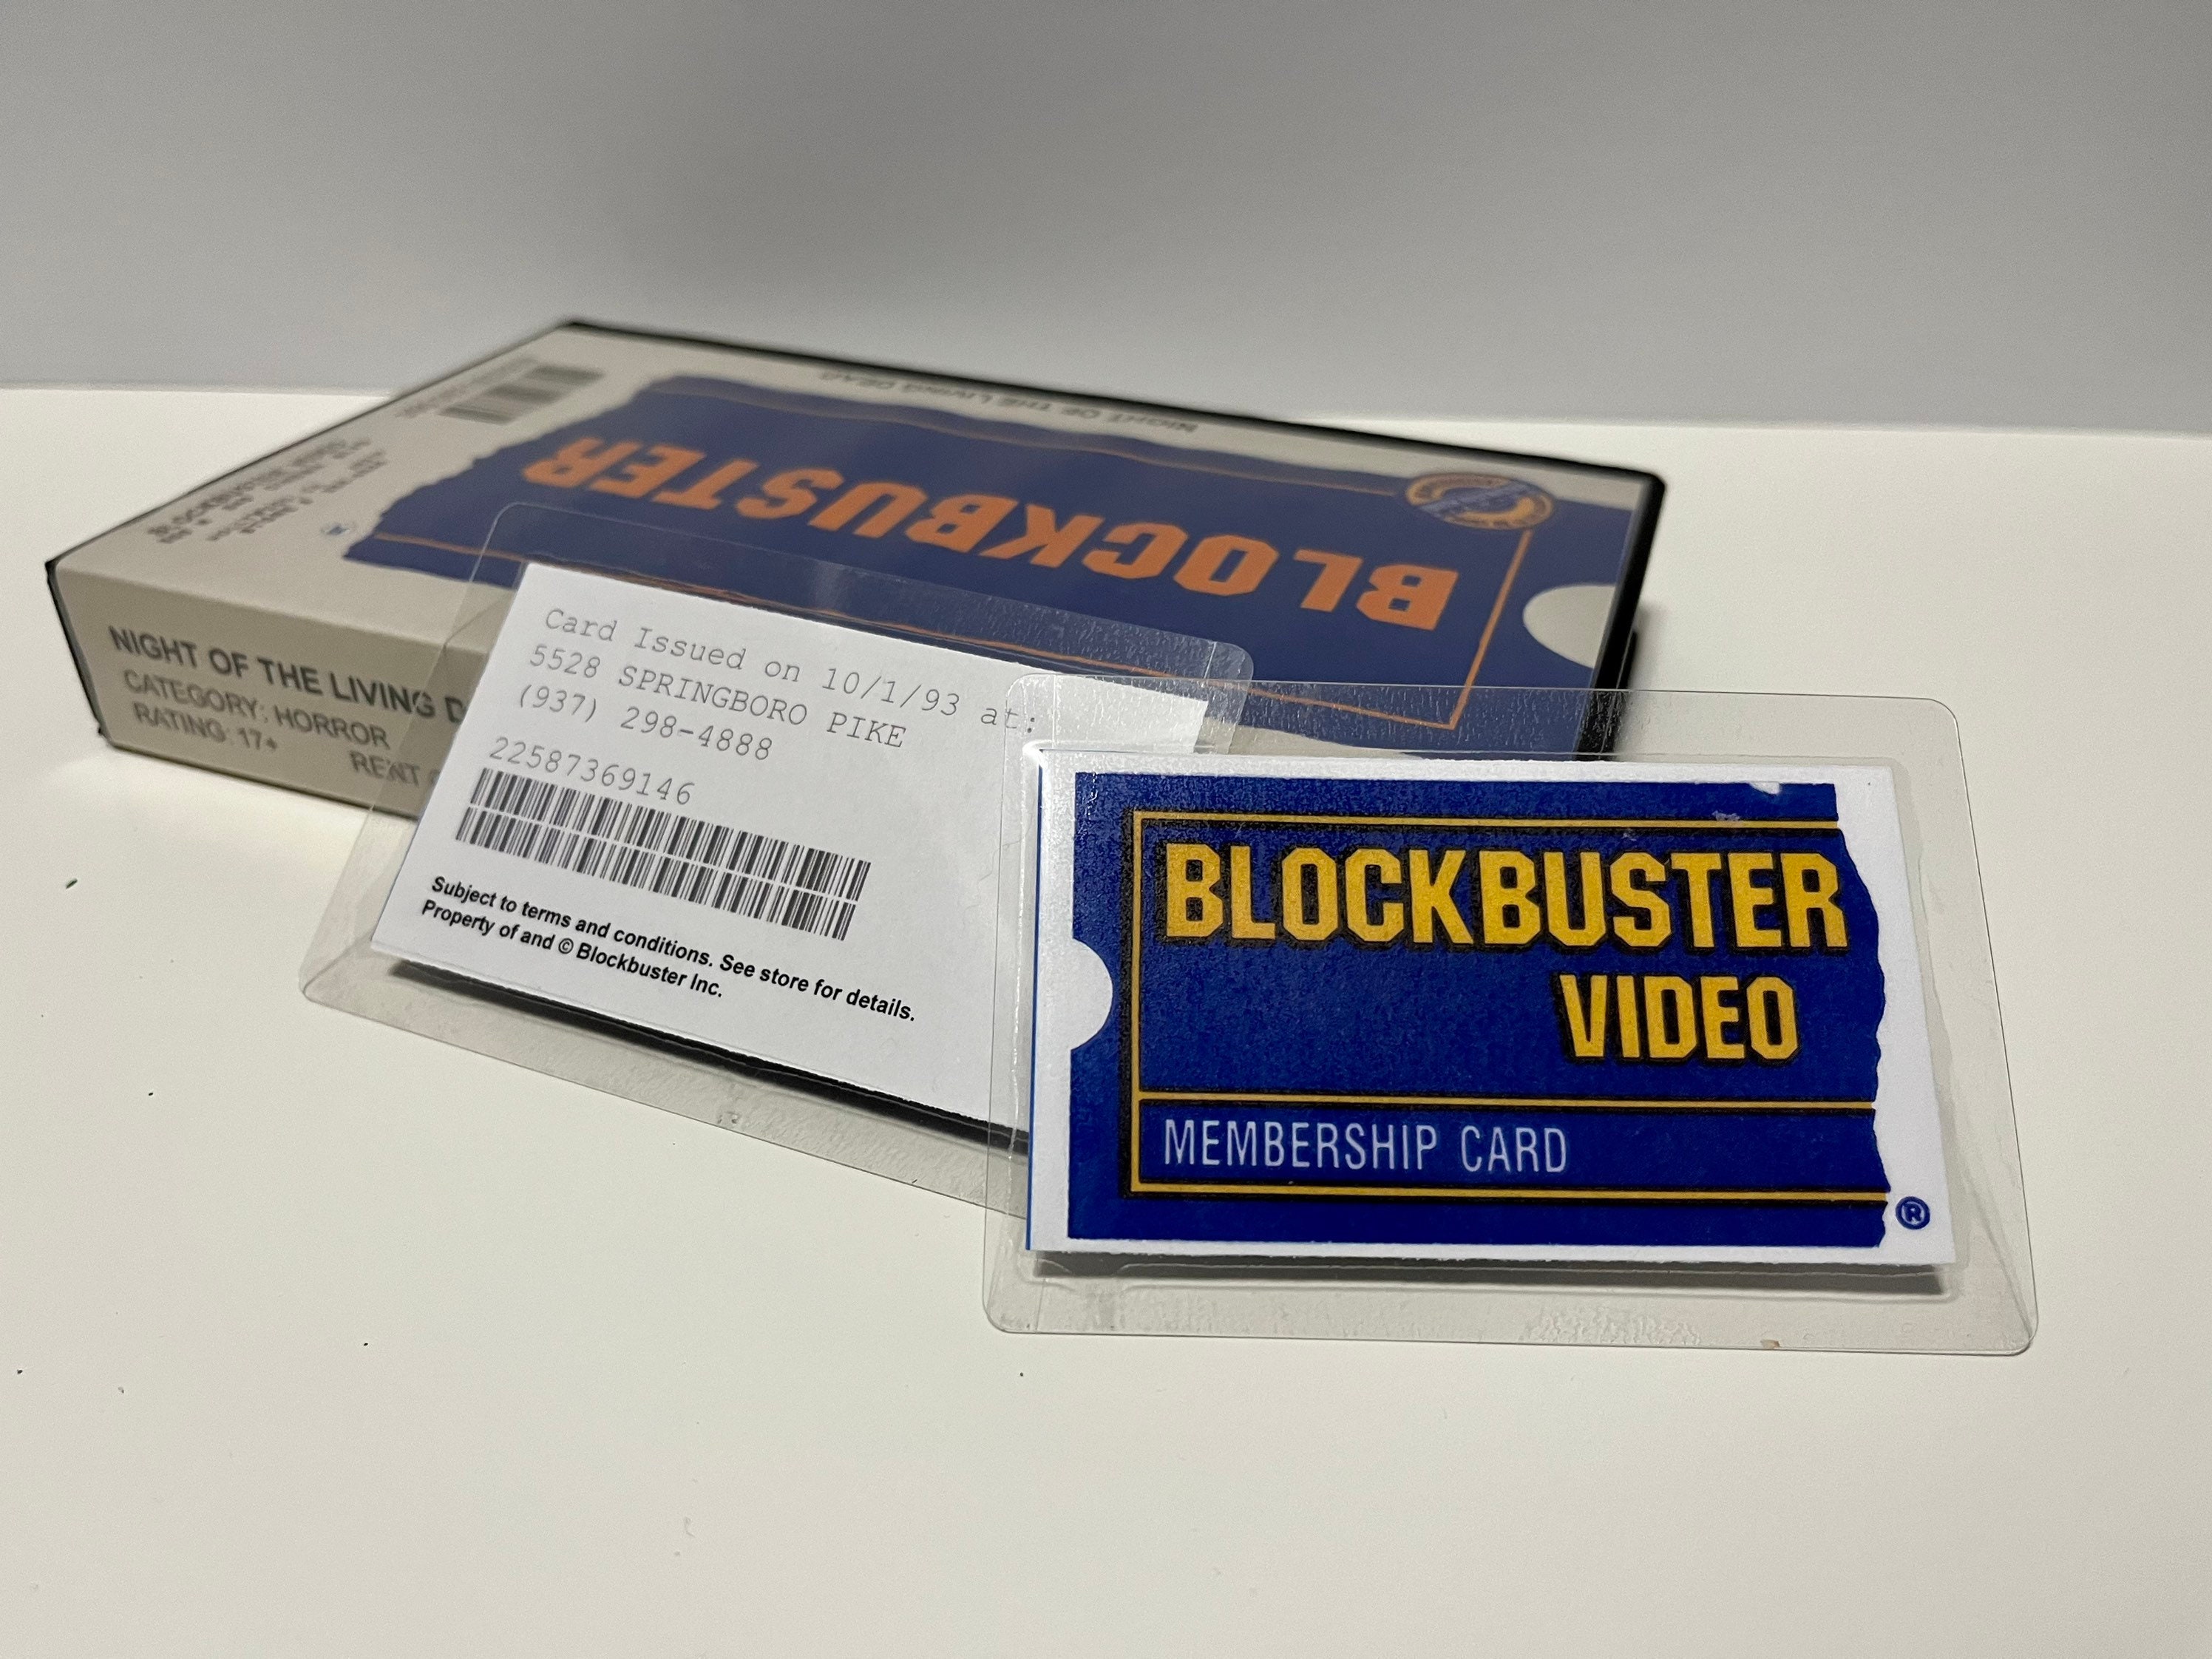 The Gift Card Was Invented by Blockbuster in 1994, Smart News